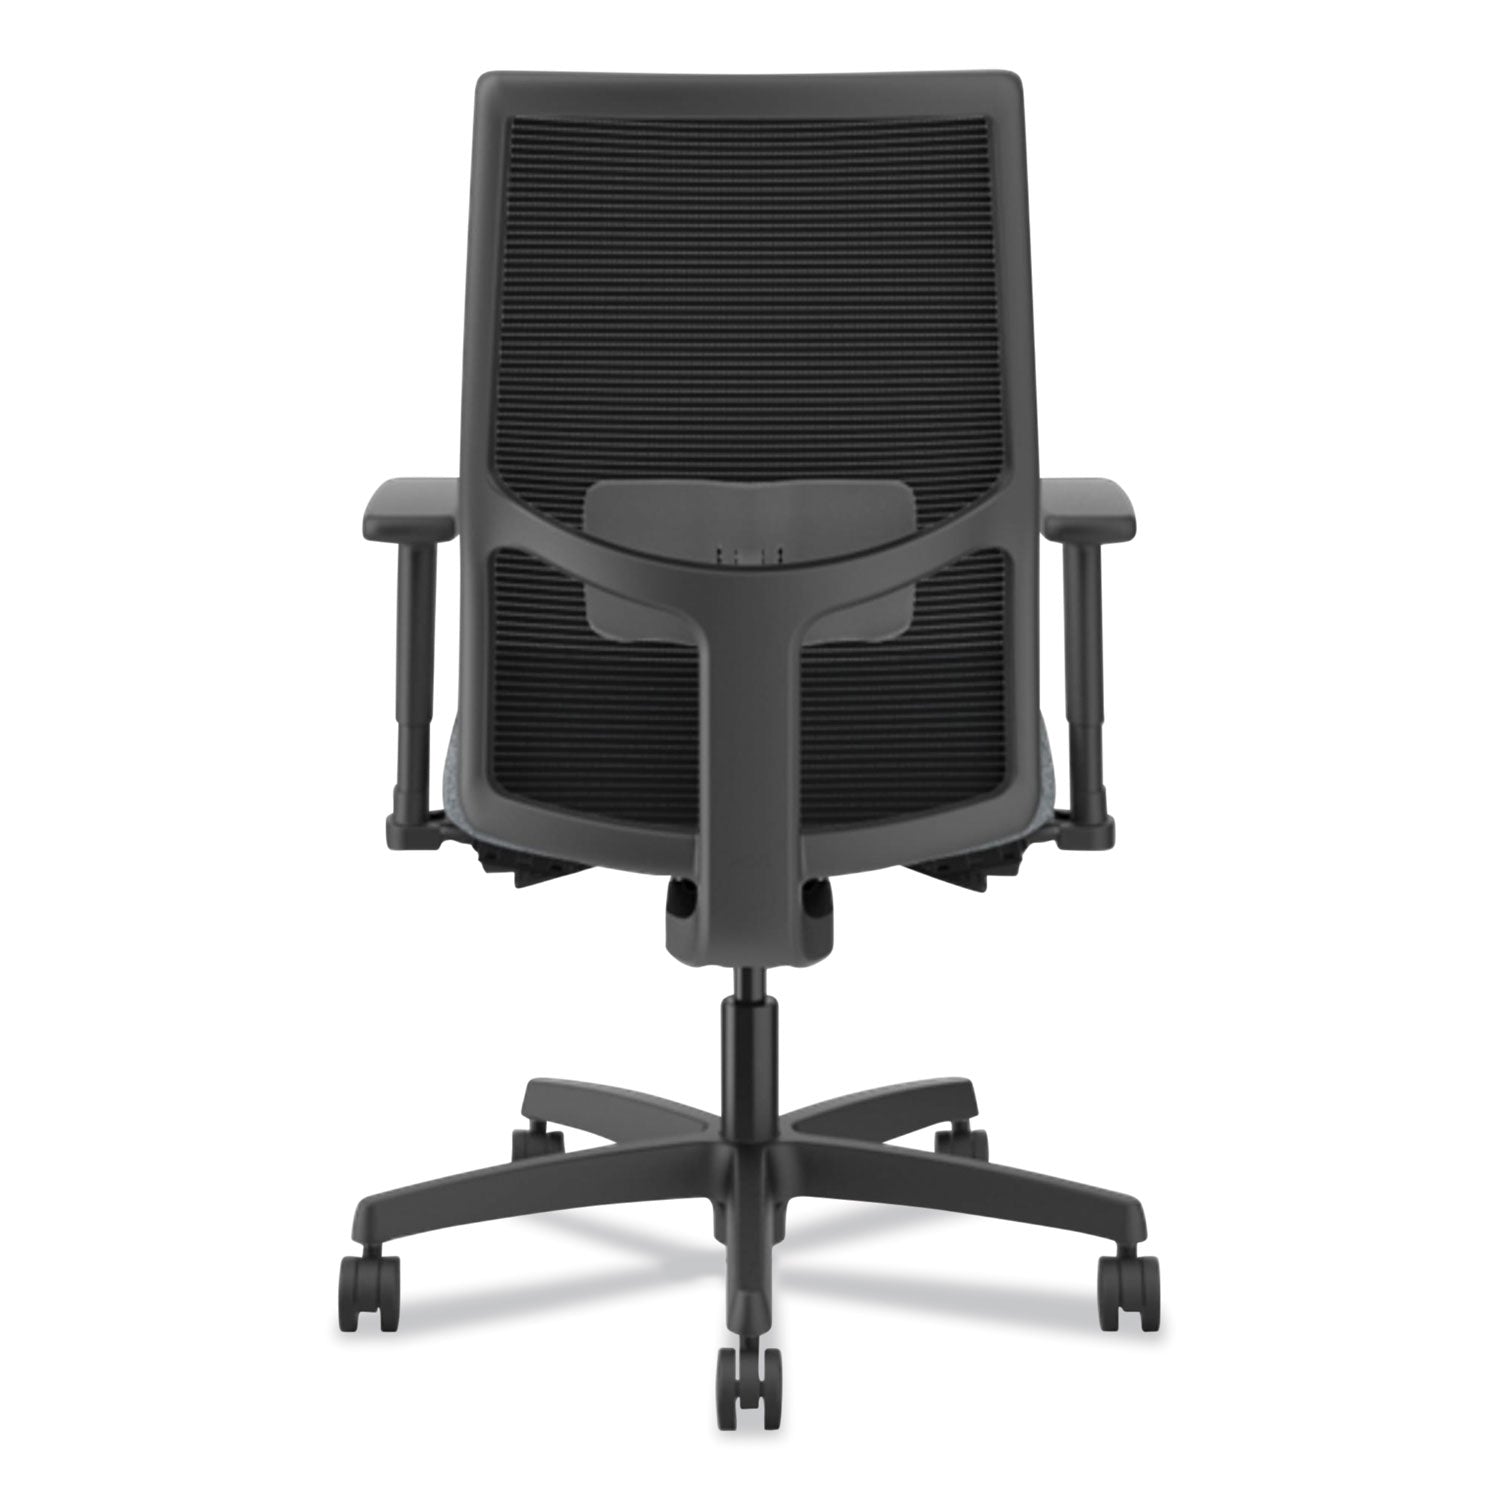 ignition-20-4-way-stretch-mid-back-mesh-task-chair-gray-adjustable-lumbar-support-basalt-black-ships-in-7-10-bus-days_honi2m2bmla25tk - 2